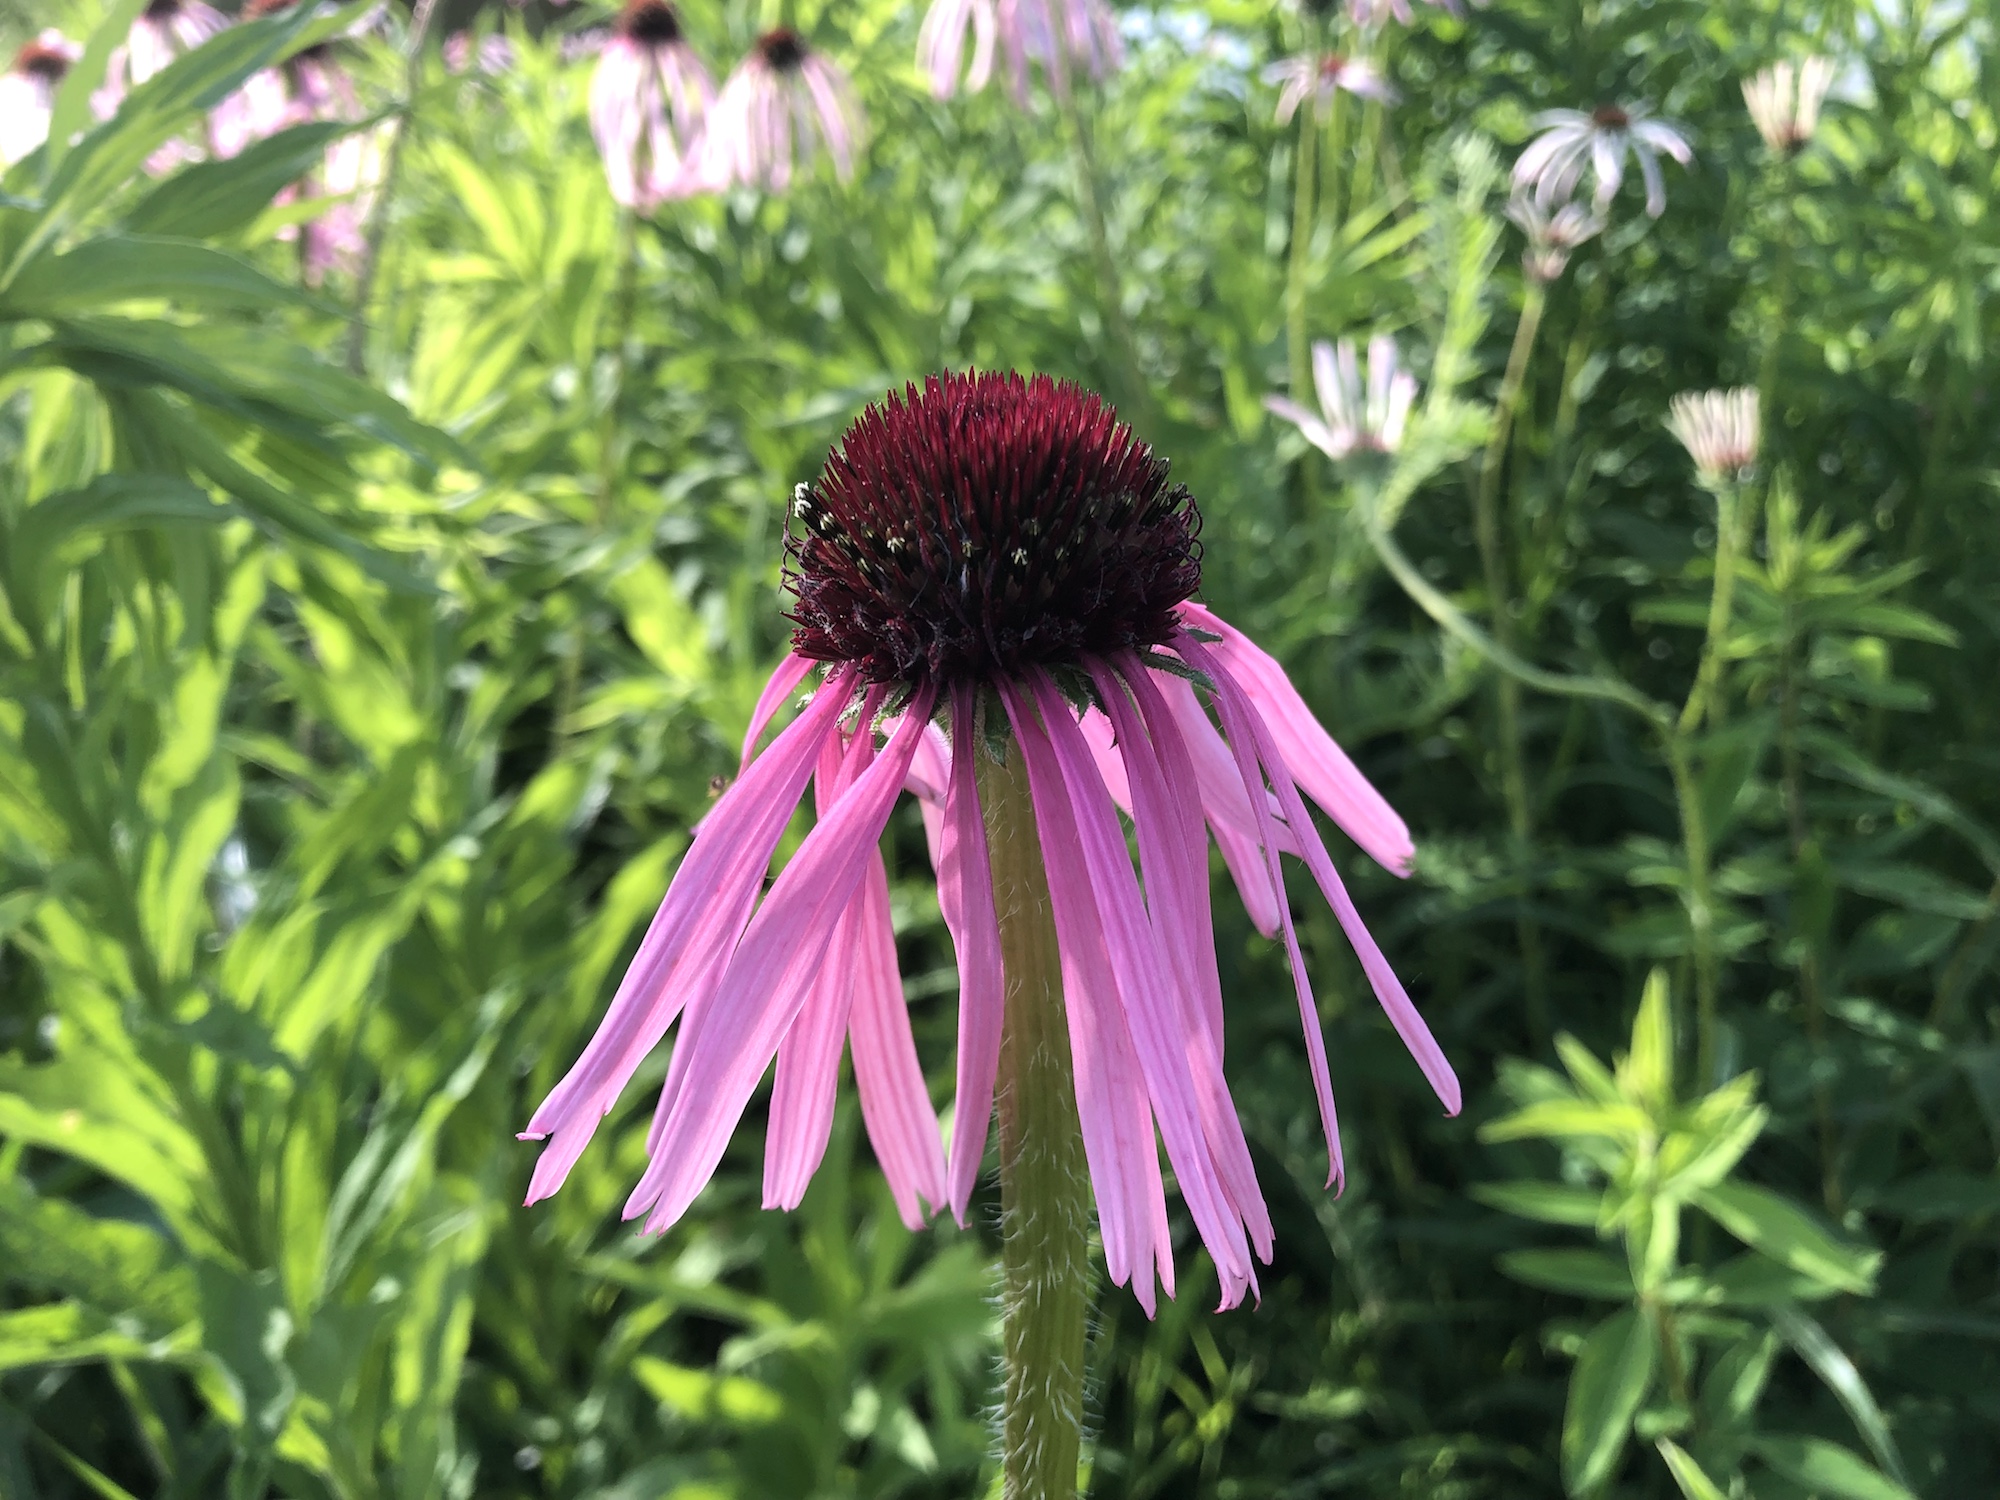 Pale purple coneflower on the banks of the retaining pond on the corner of Nakoma Road and Manitou Way on June 26, 2019.